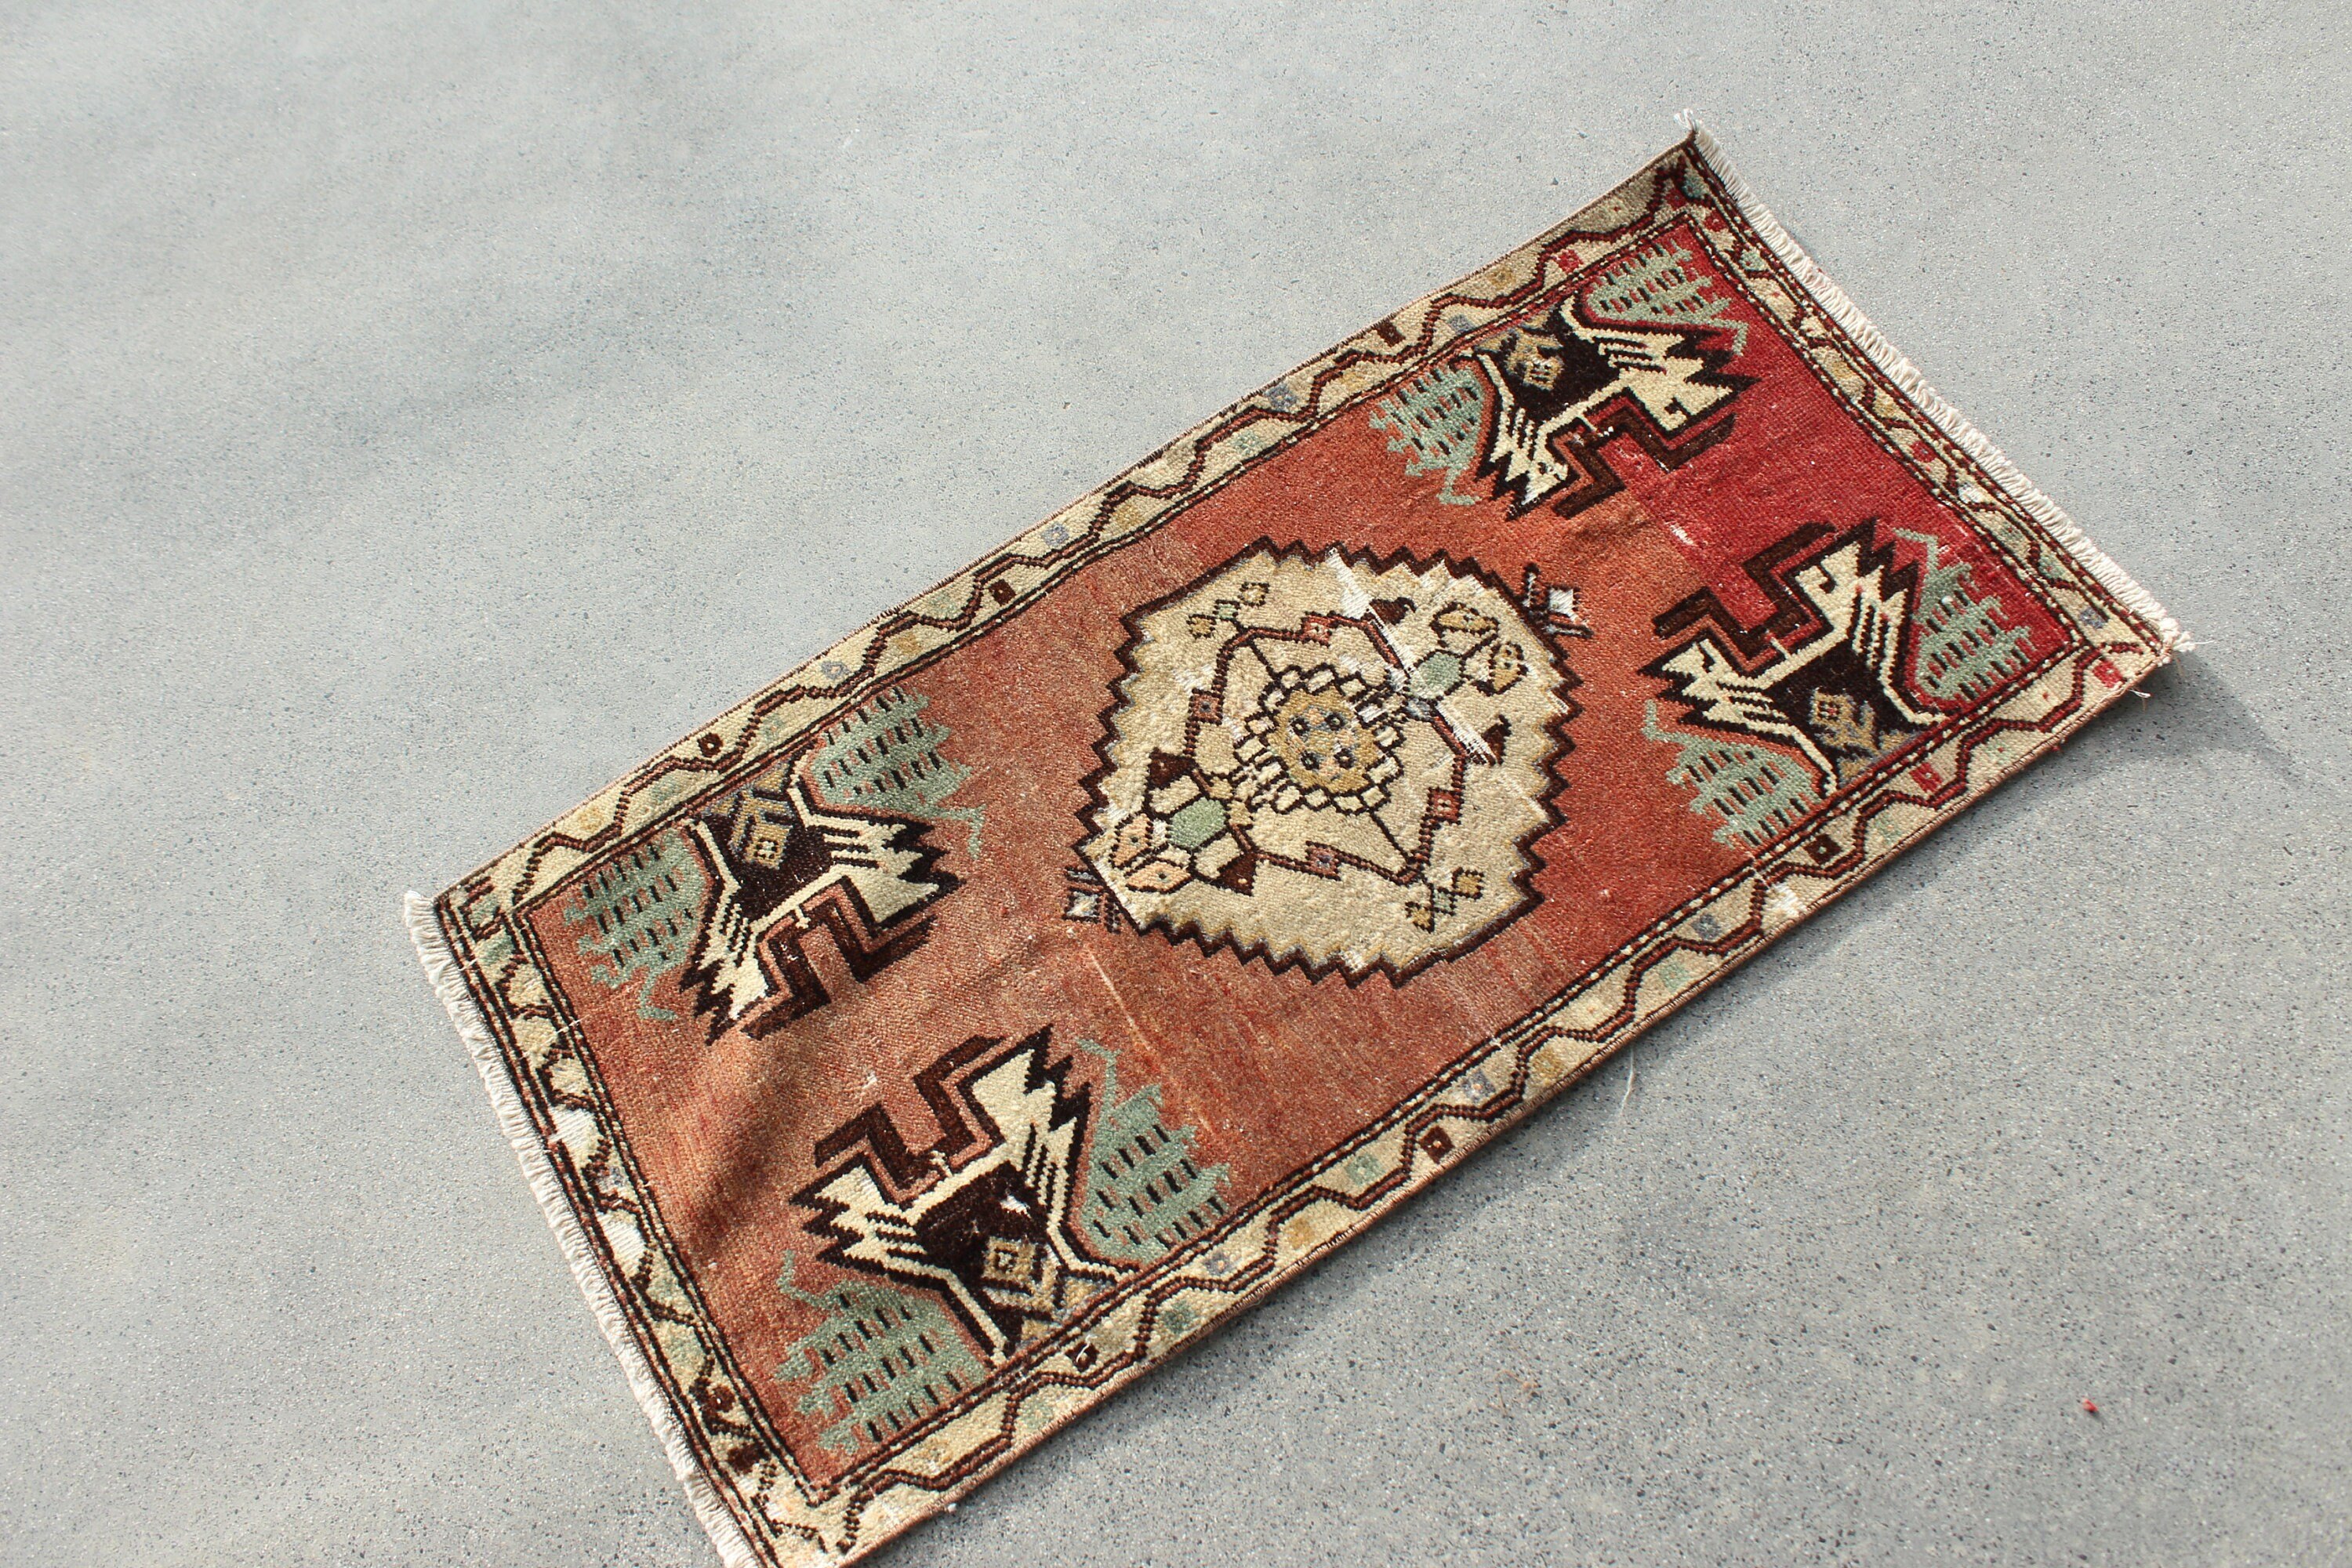 Car Mat Rug, Vintage Rugs, Cool Rugs, Bathroom Rug, Turkish Rugs, Rugs for Wall Hanging, Antique Rug, 1.6x3.2 ft Small Rug, Brown Cool Rug